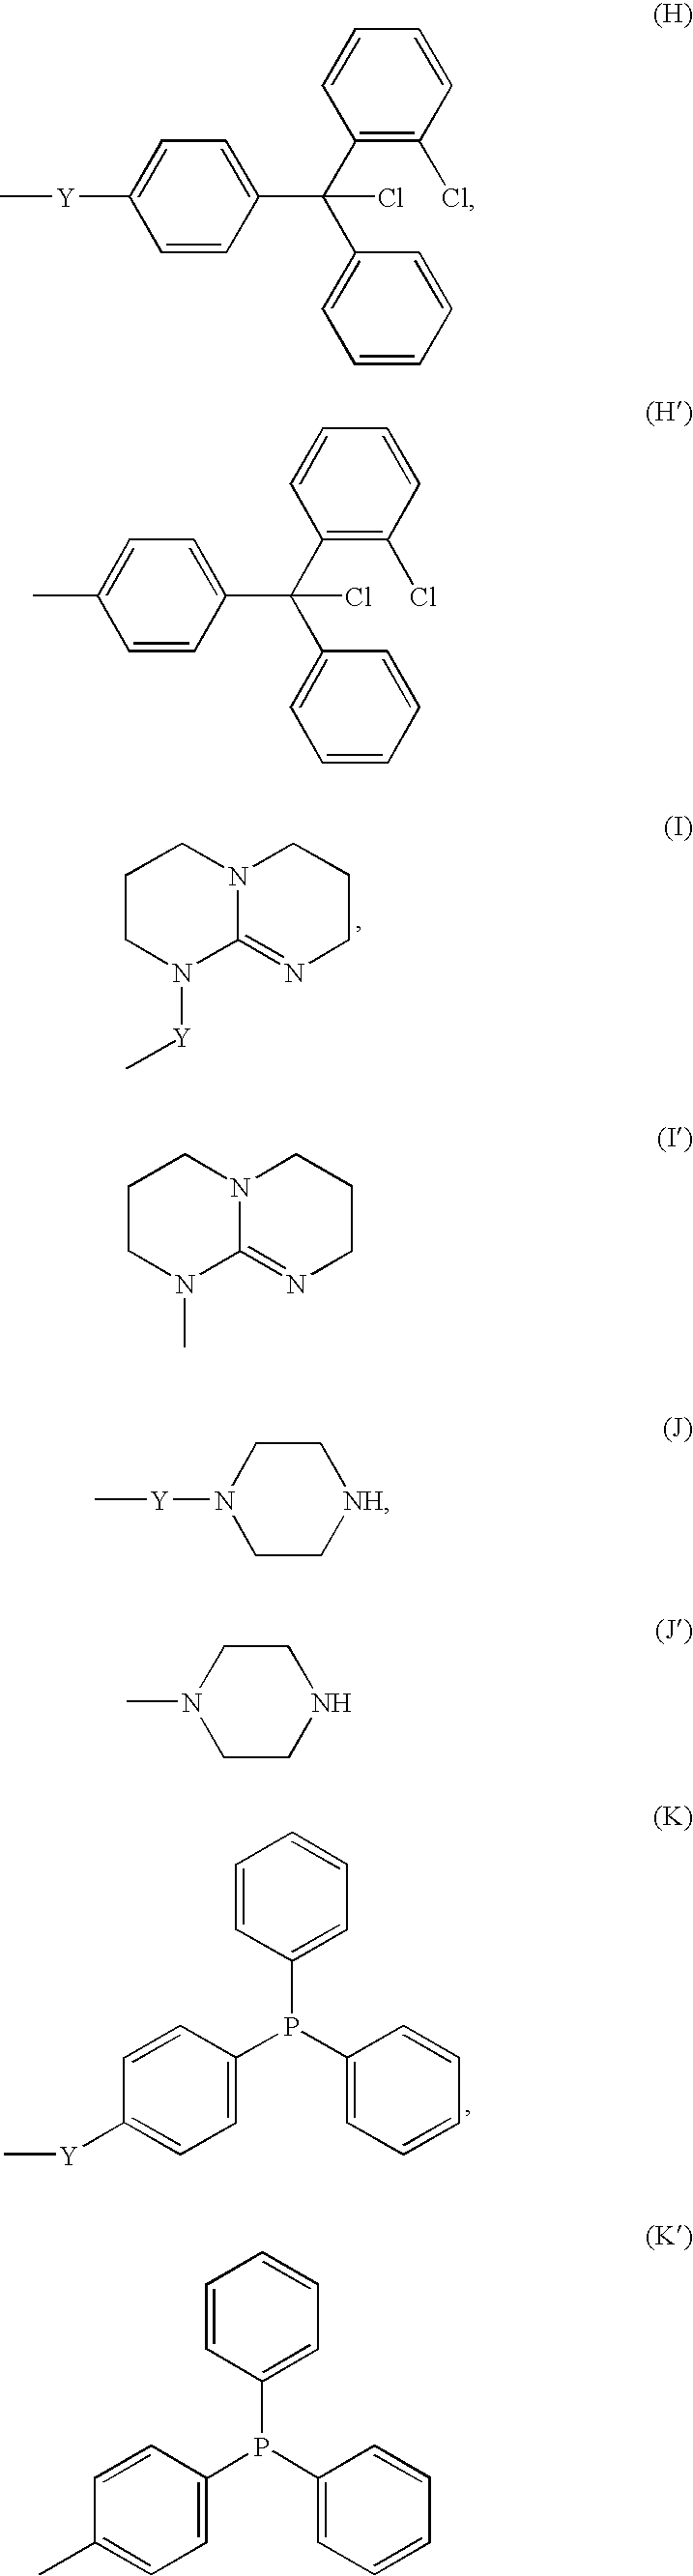 Reagent for Organic Synthesis and Method of Organic Synthesis Reaction with the Reagent